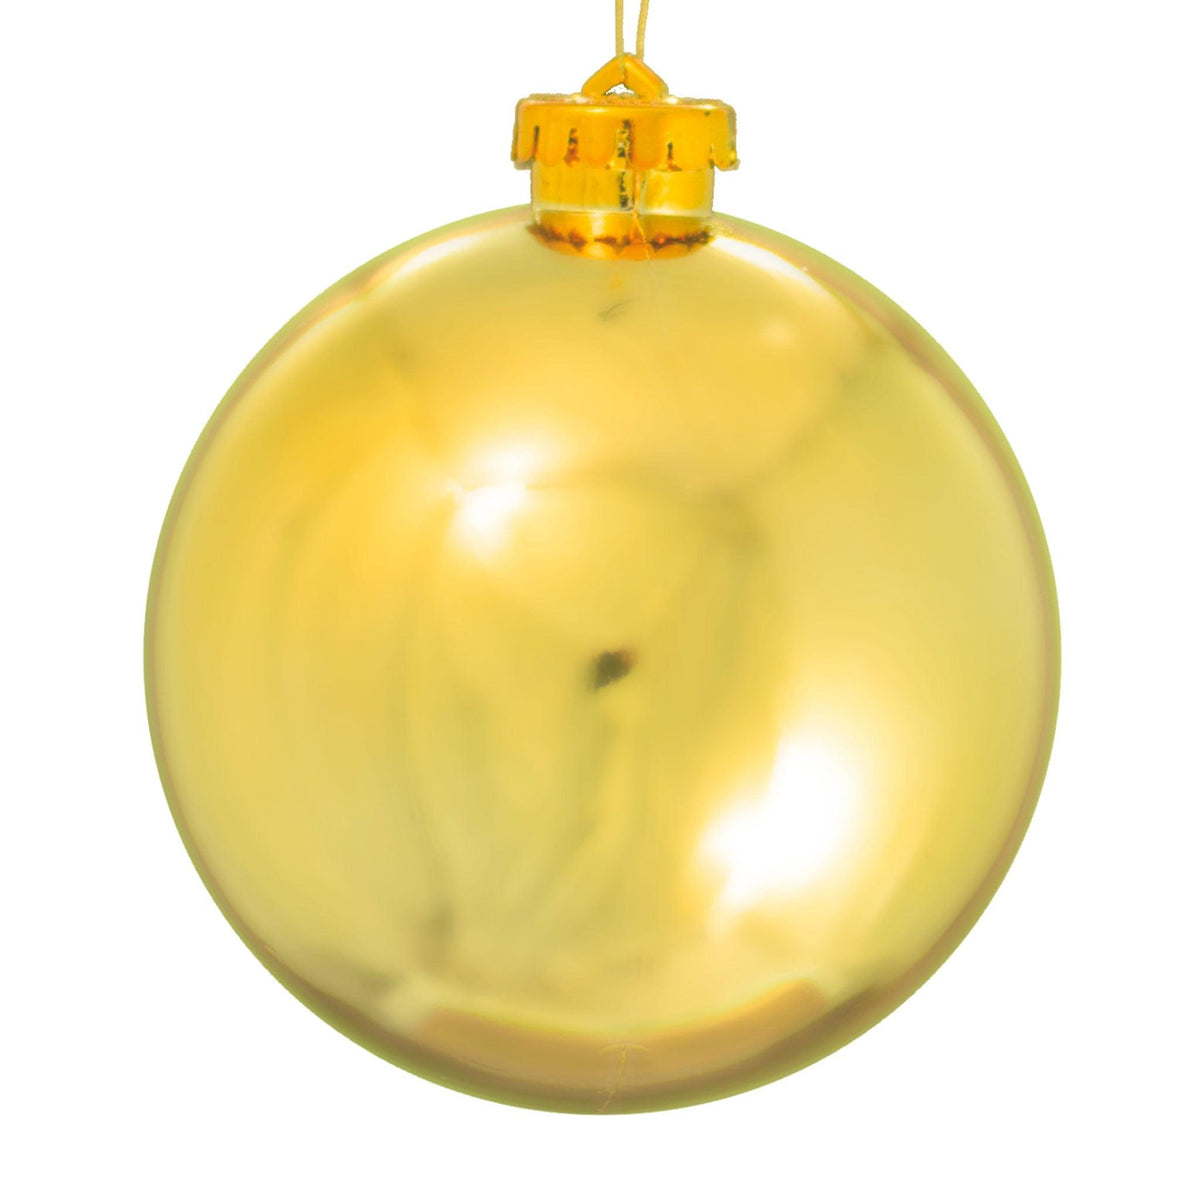 Shiny Gold Plastic Ball Ornaments & Christmas Tree Decorations sold by Lee Display. Available now at leedisplay.com